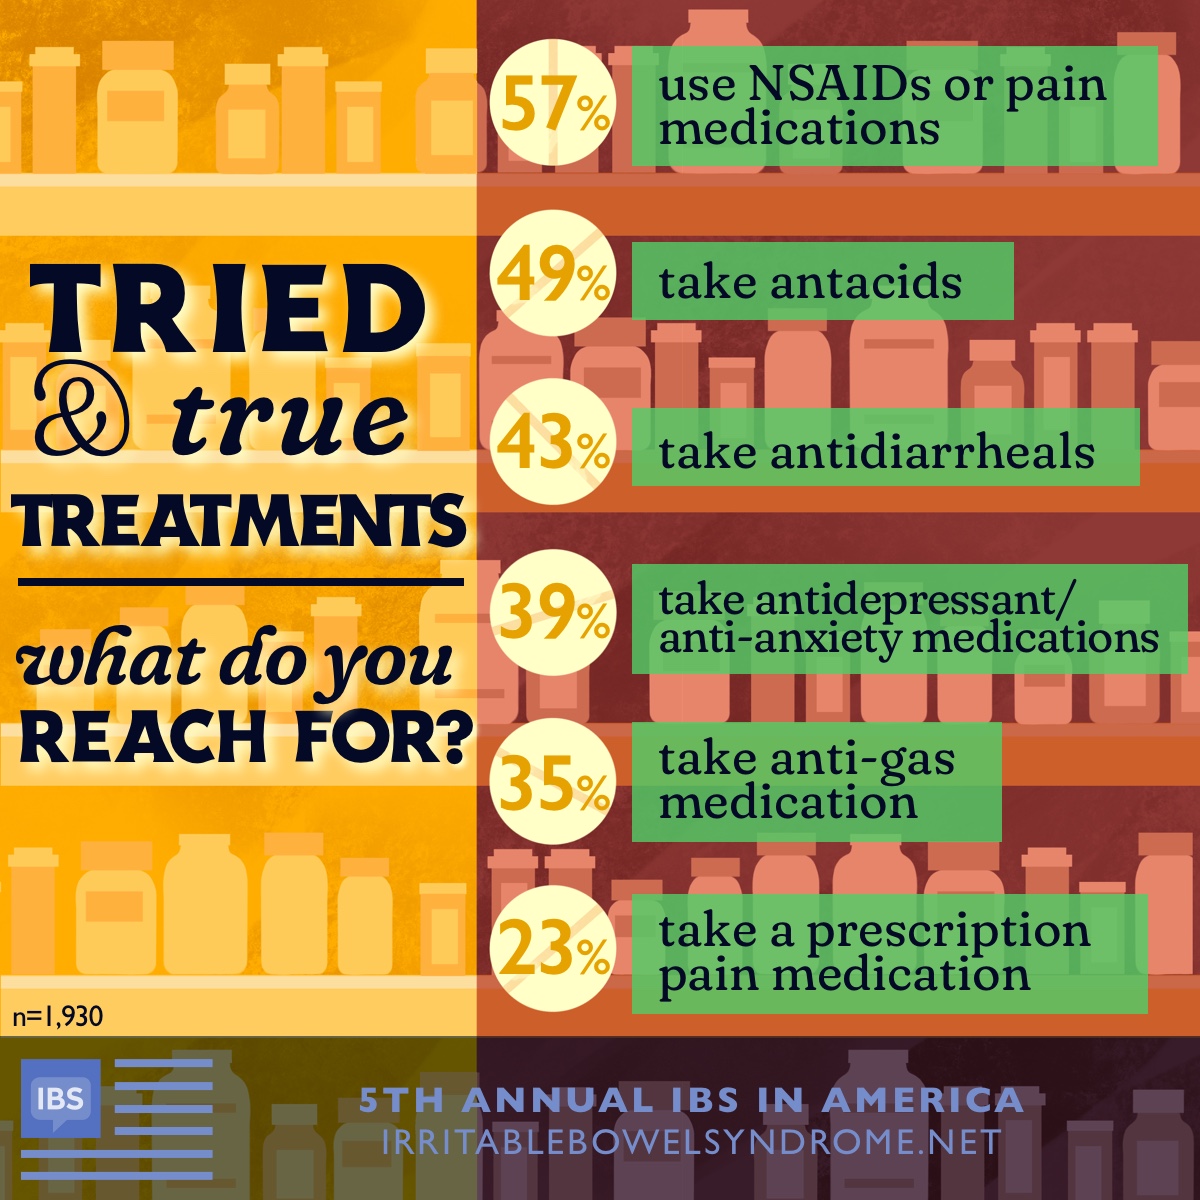 Infographic featuring data on medications people with IBS take: NSAIDs or pain medication, antacids, antidiarrheals, antidepressant/anxiety medication, anti-gas medication, and prescription pain medication.